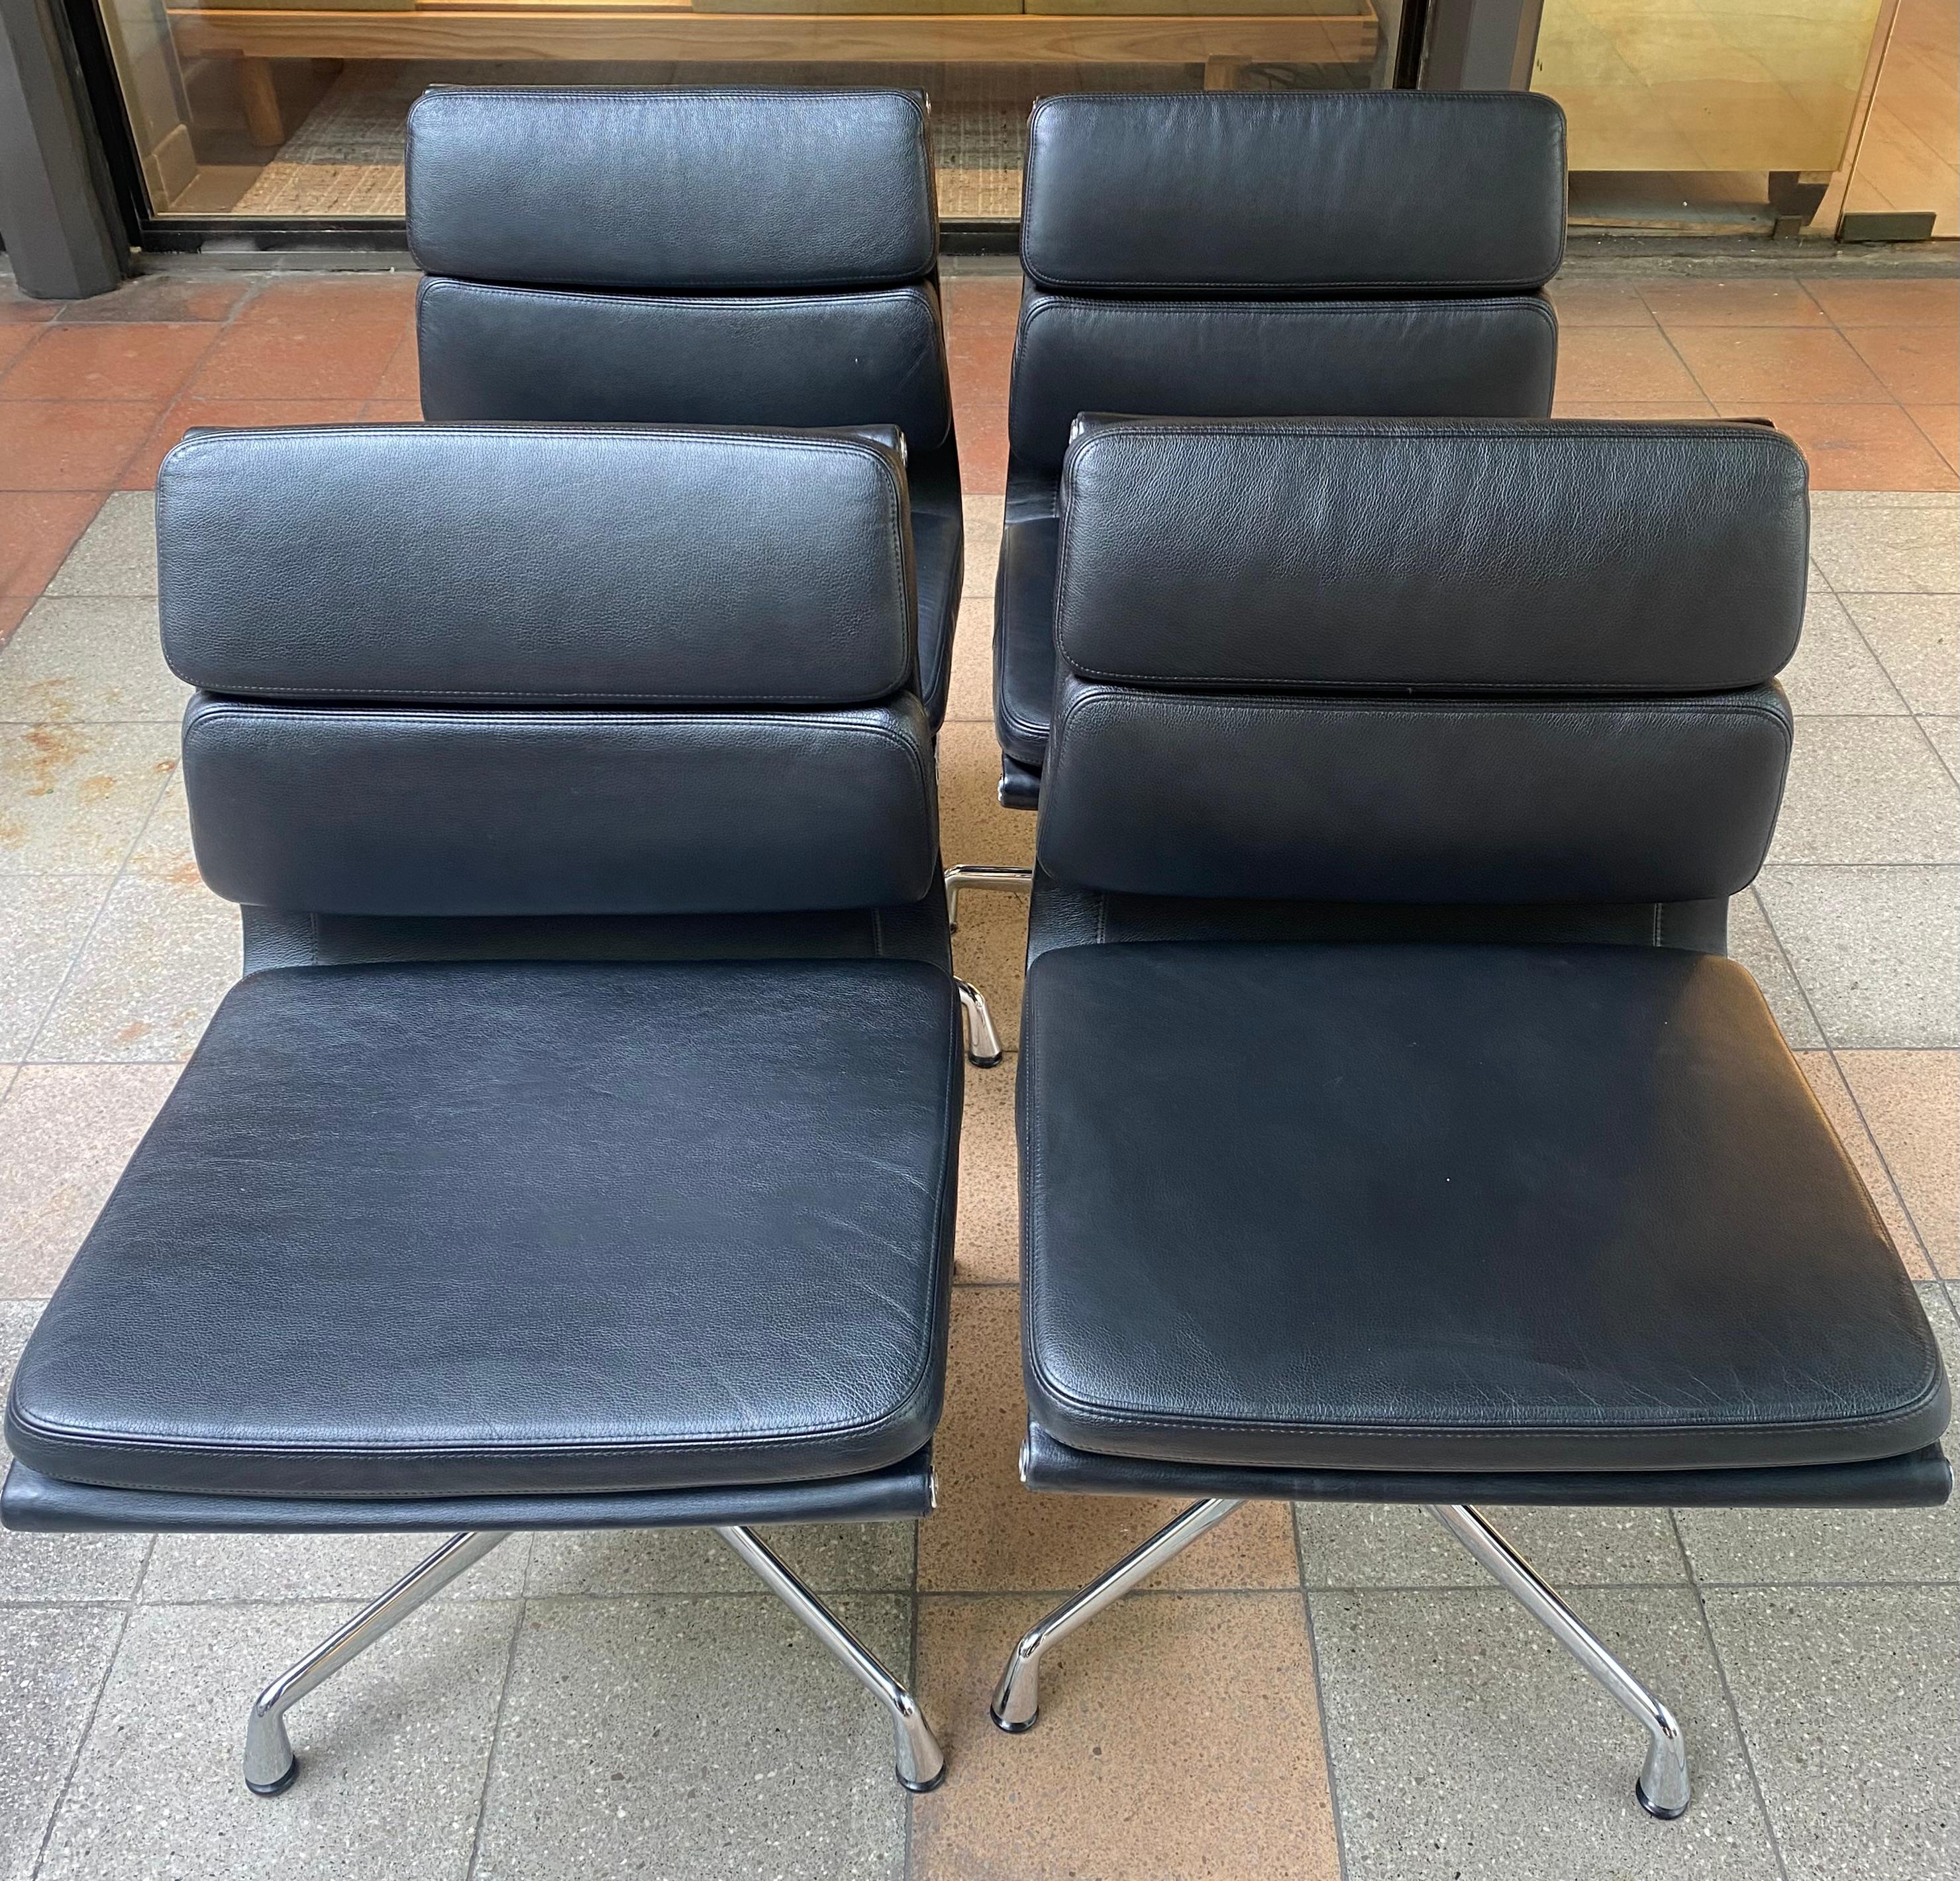 Soft Pad - Eames 
Set of 2 soft pad chairs 
Black leather and aluminium 
Swivel 
Signed, dated and numbered 
Ref :
Swivel office chairs. Black leather seat and back.
Chrome-plated cast aluminium four-star base.
Dimensions ; H.: 84 cm, W.: 55 cm, D.: